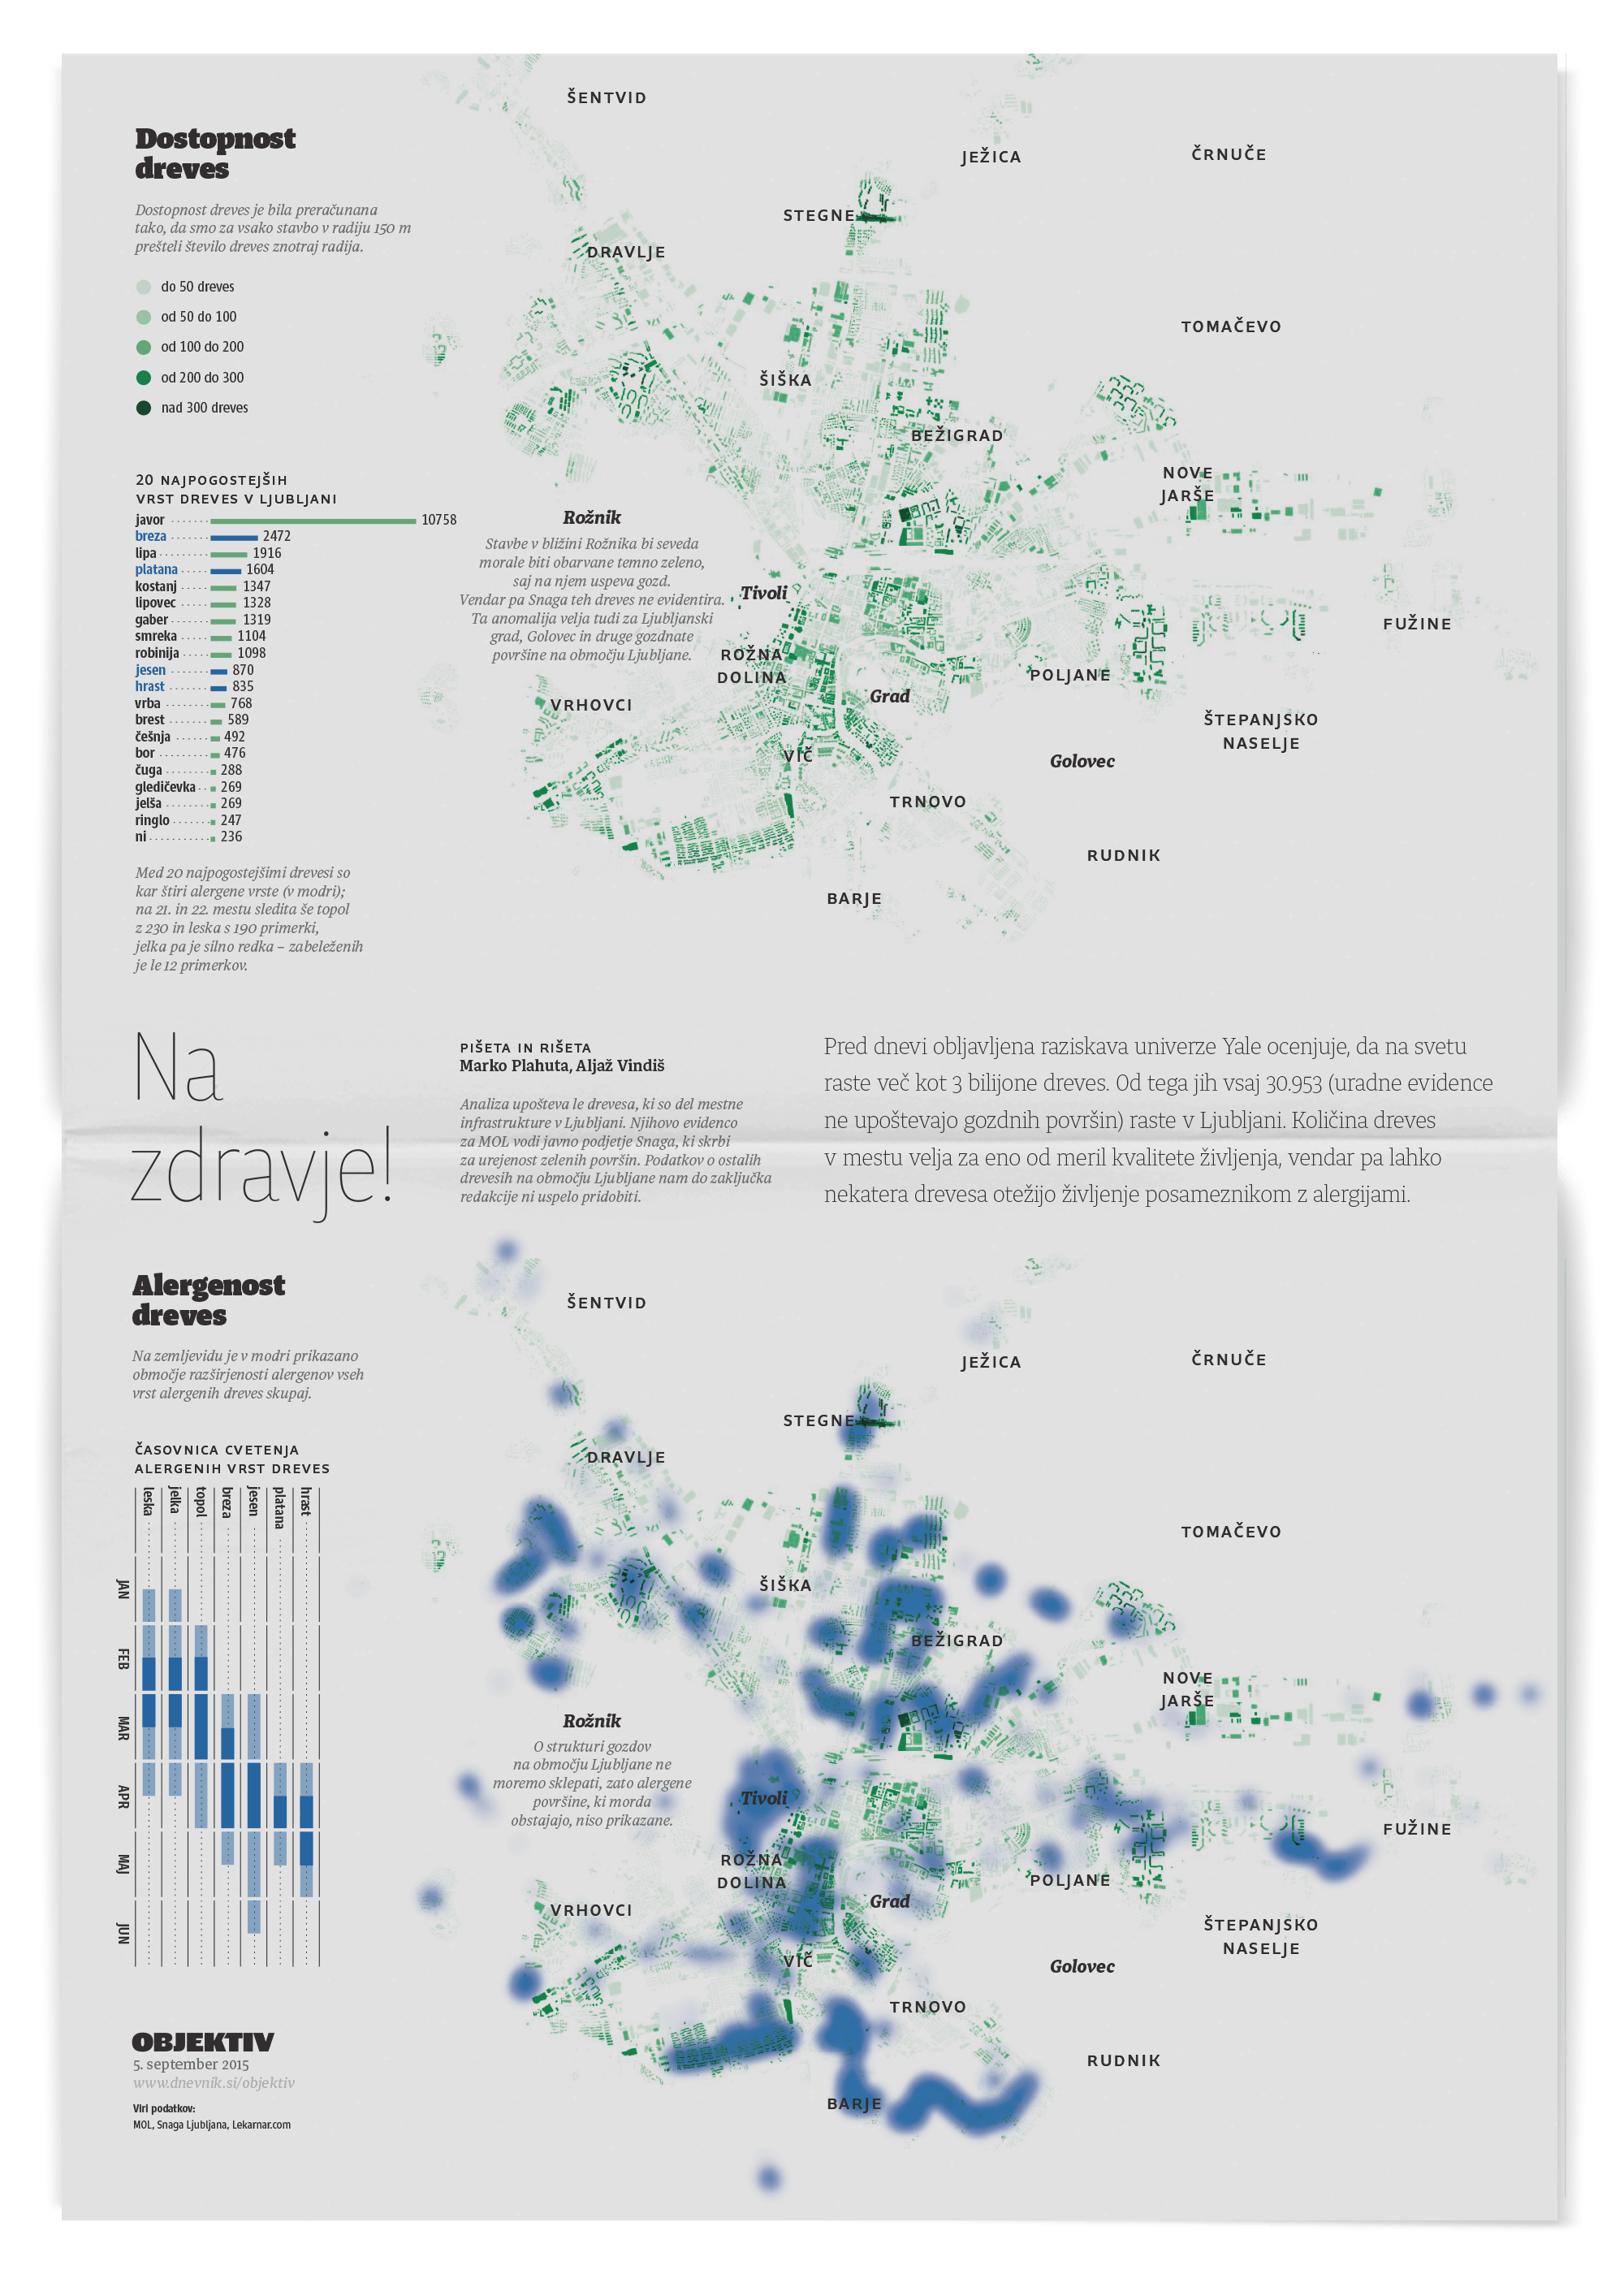 Map of trees in Ljubljana, and how far their alergens reach.